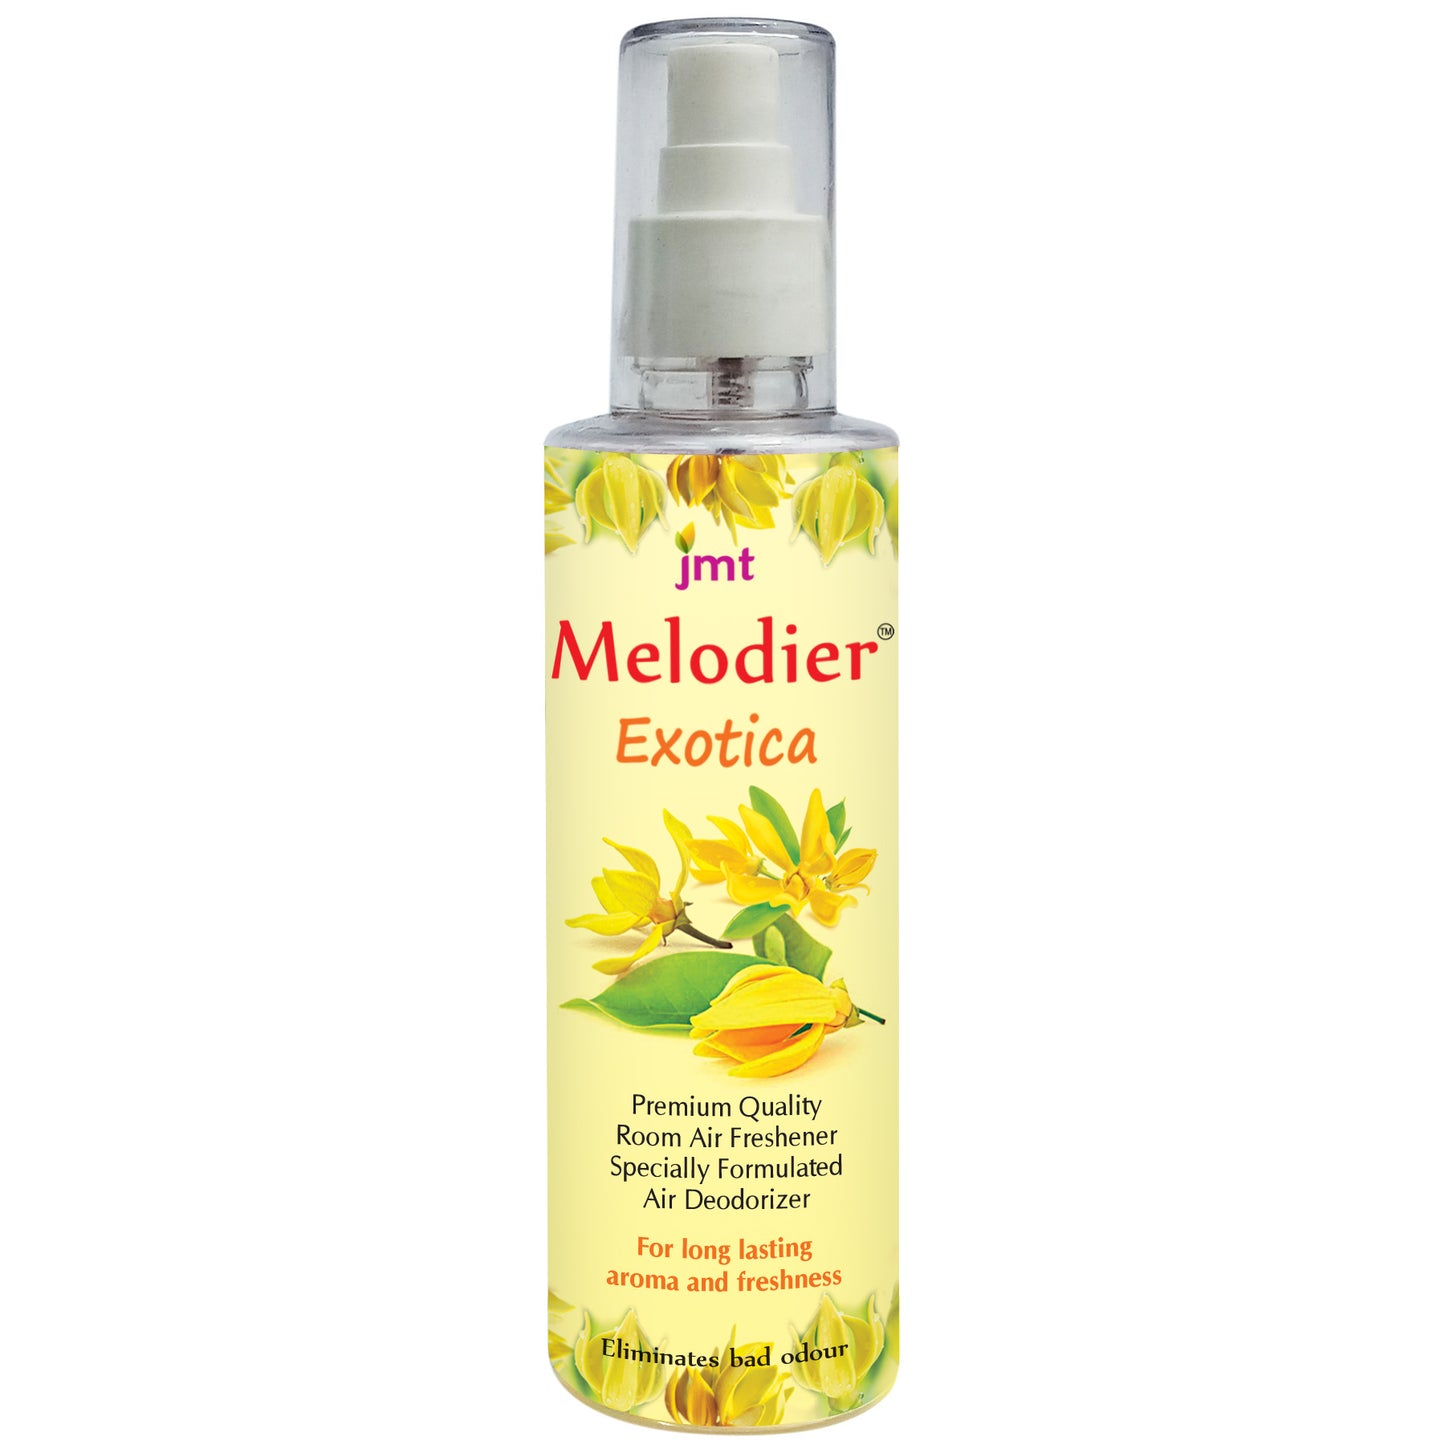 Melodier Exotica - Premium Quality Room Air Freshener with Air Deodorizer